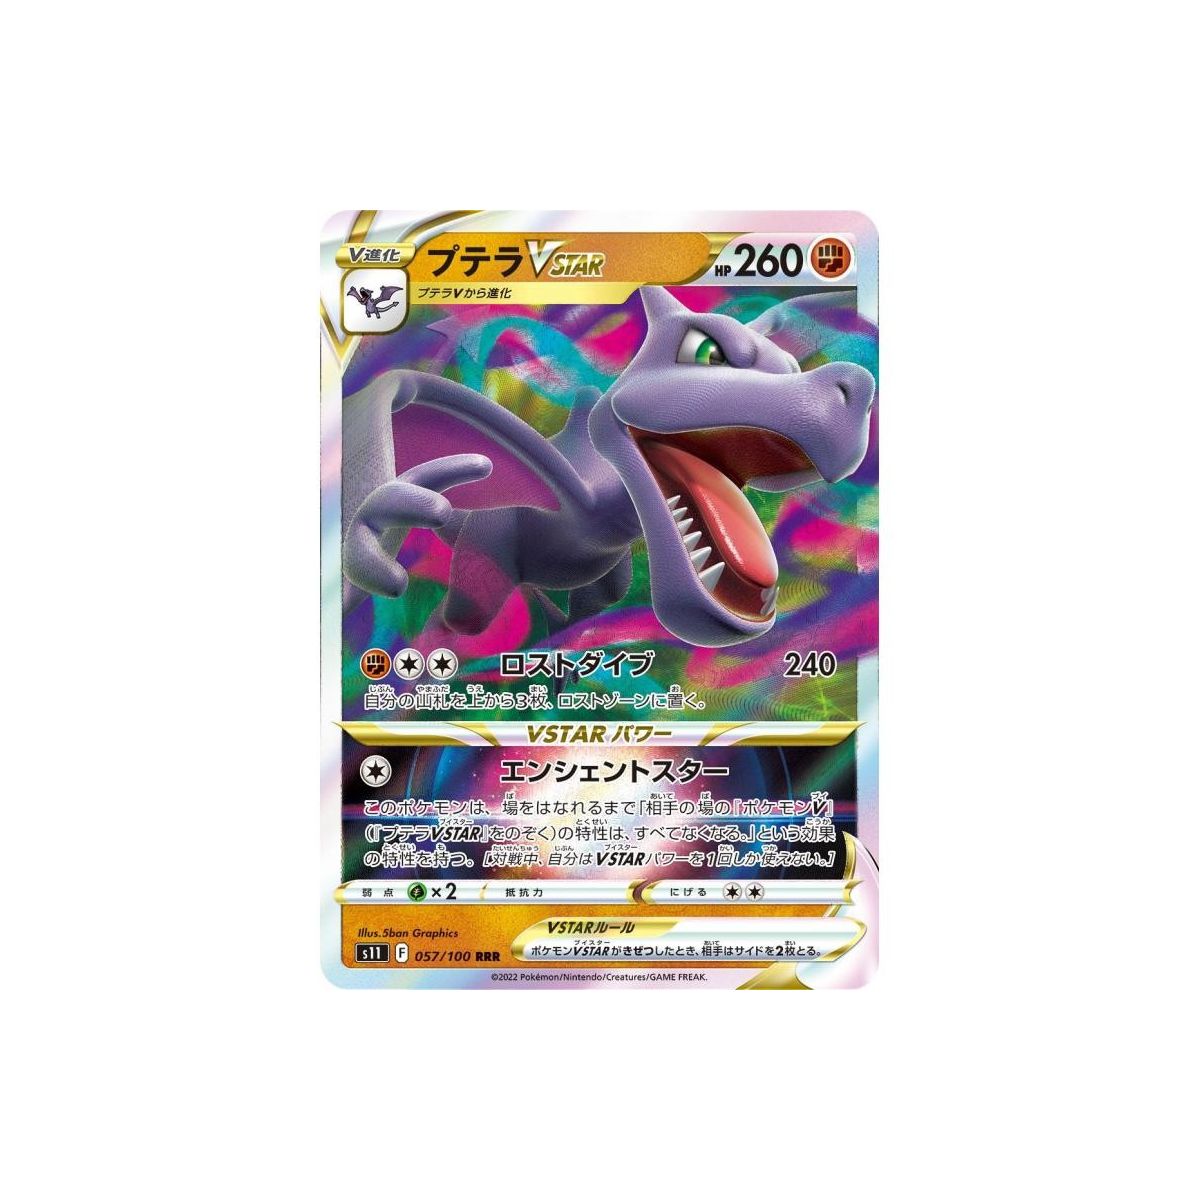 Aerodactyl VSTAR 057/100 S11 Lost Abyss Ultra Rare Unlimited Japanese